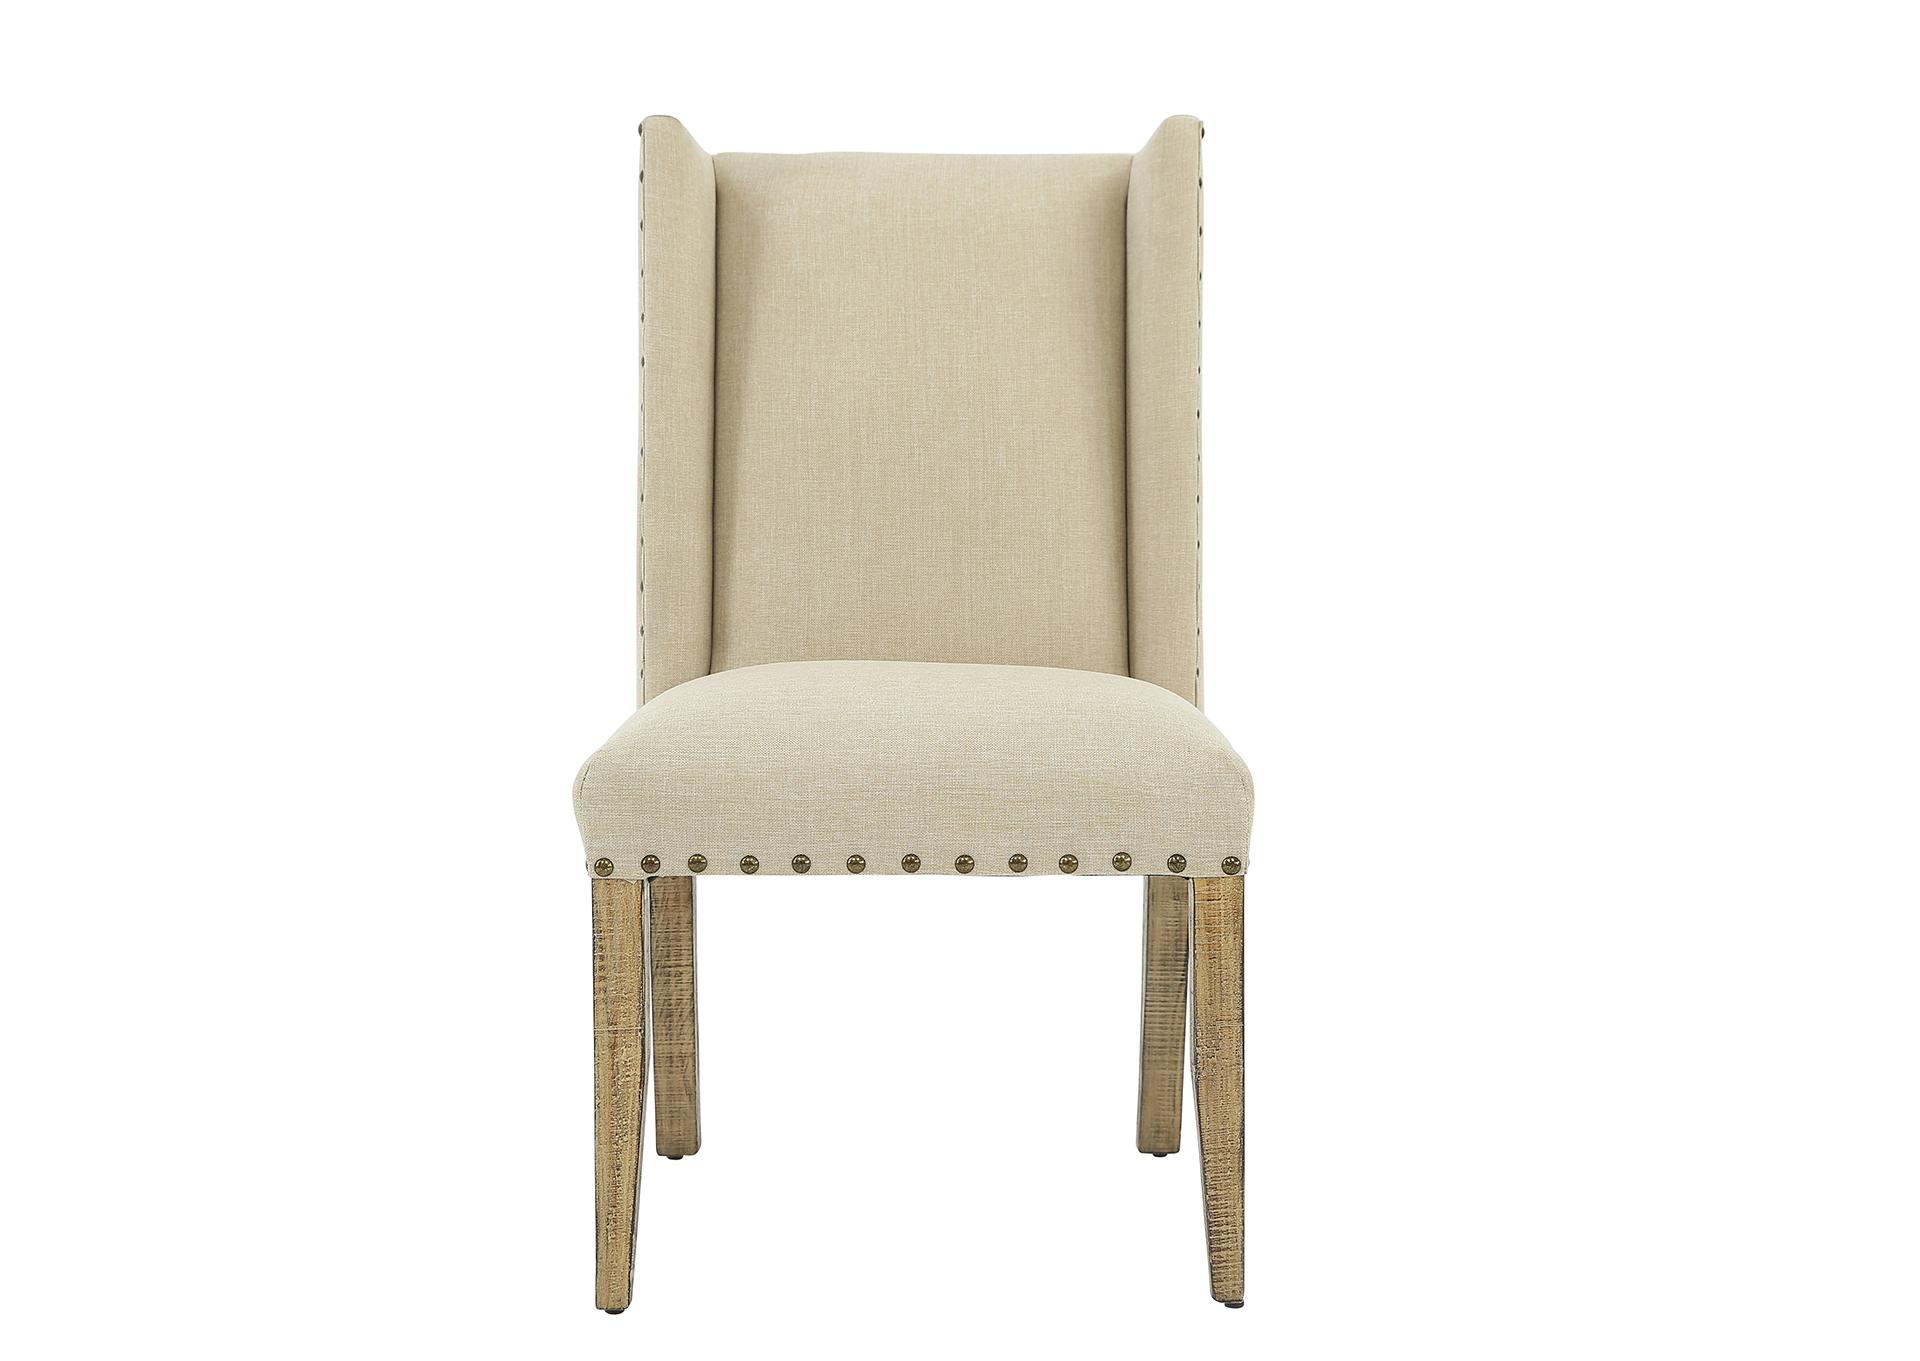 RENO UPHOLSTERY SIDE CHAIR